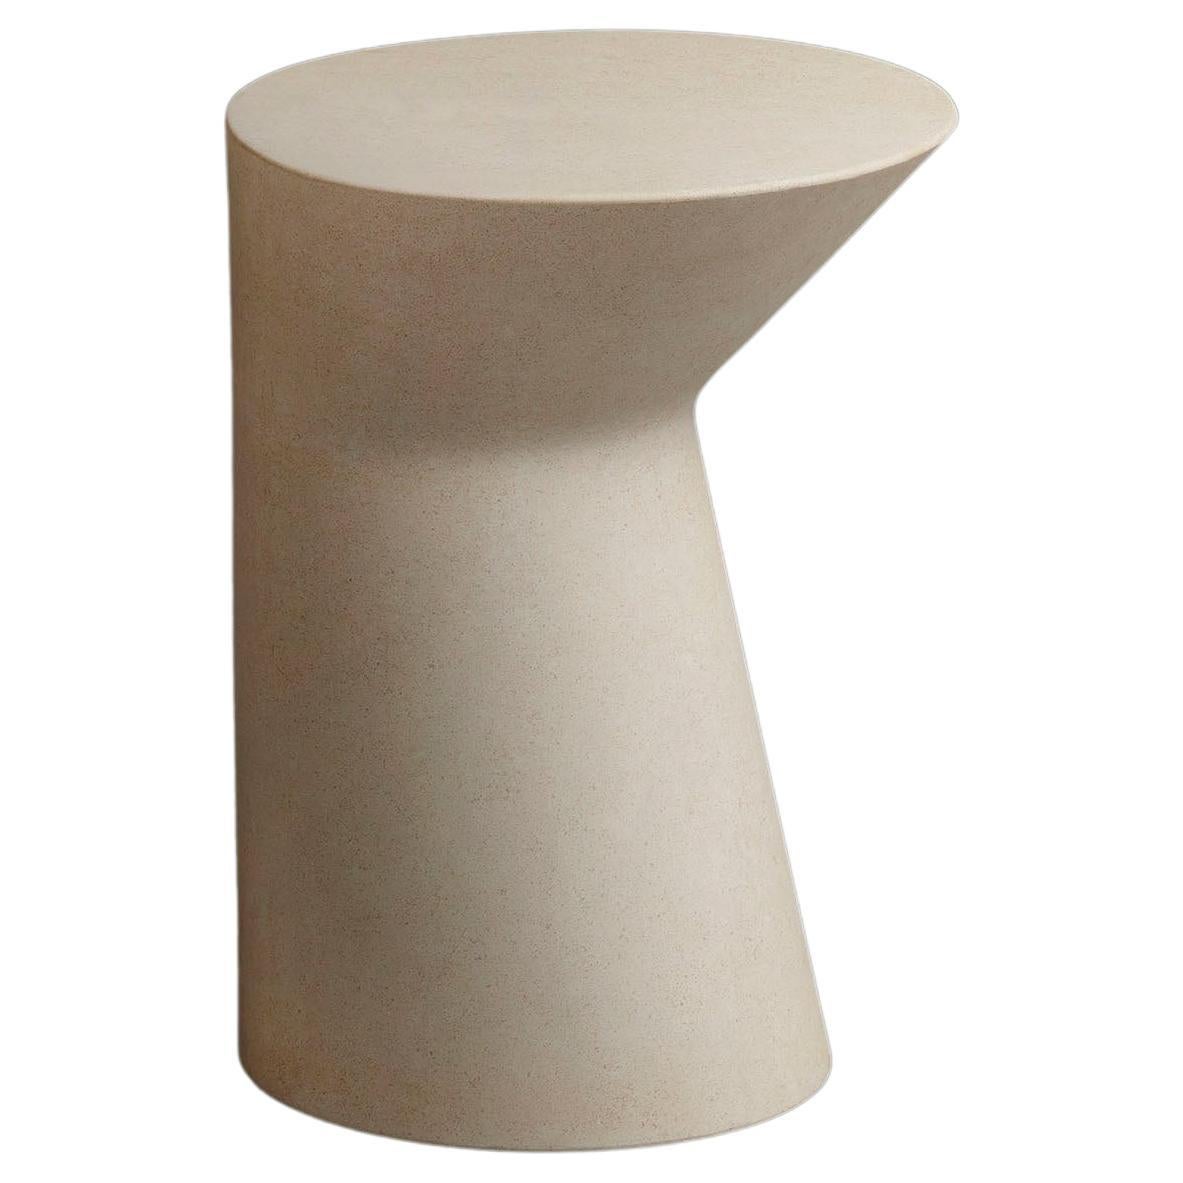 Side Table in Chauvigny stone, Io medium by Adolfo Abejon For Sale